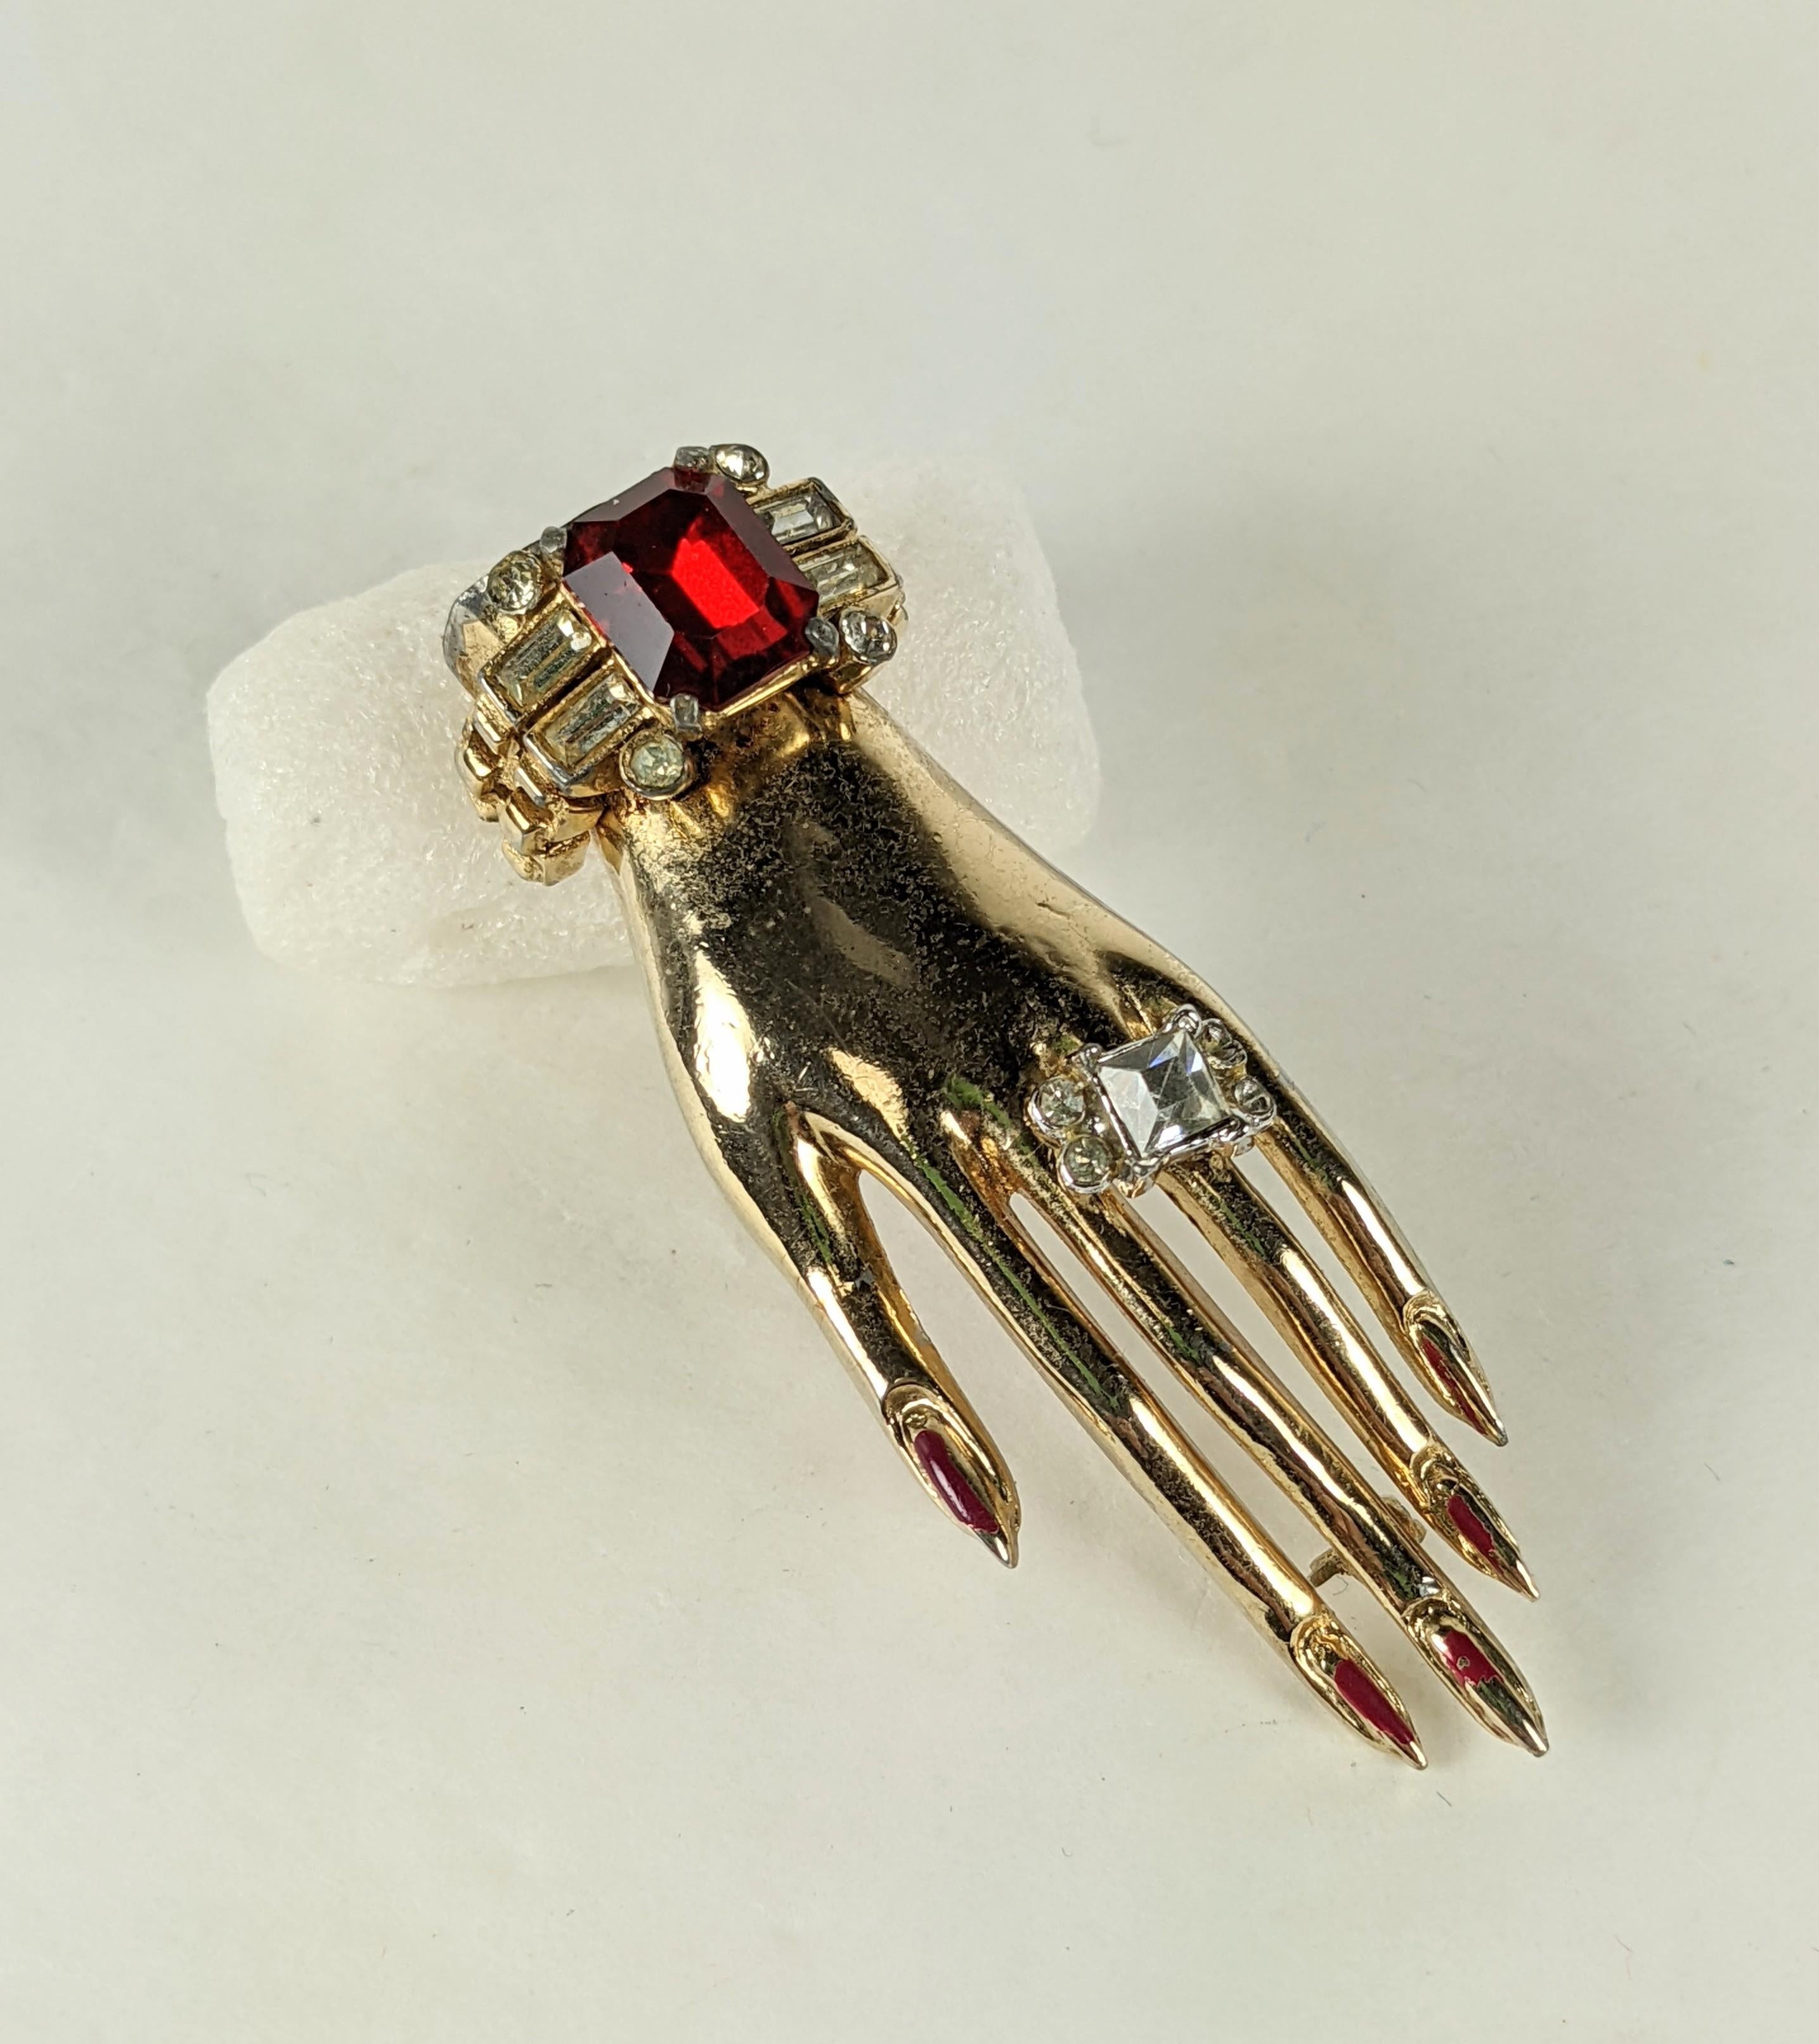 Charming Coro Art Deco Jeweled hand brooch from the 1930's. A gilt metal hand with large paste 